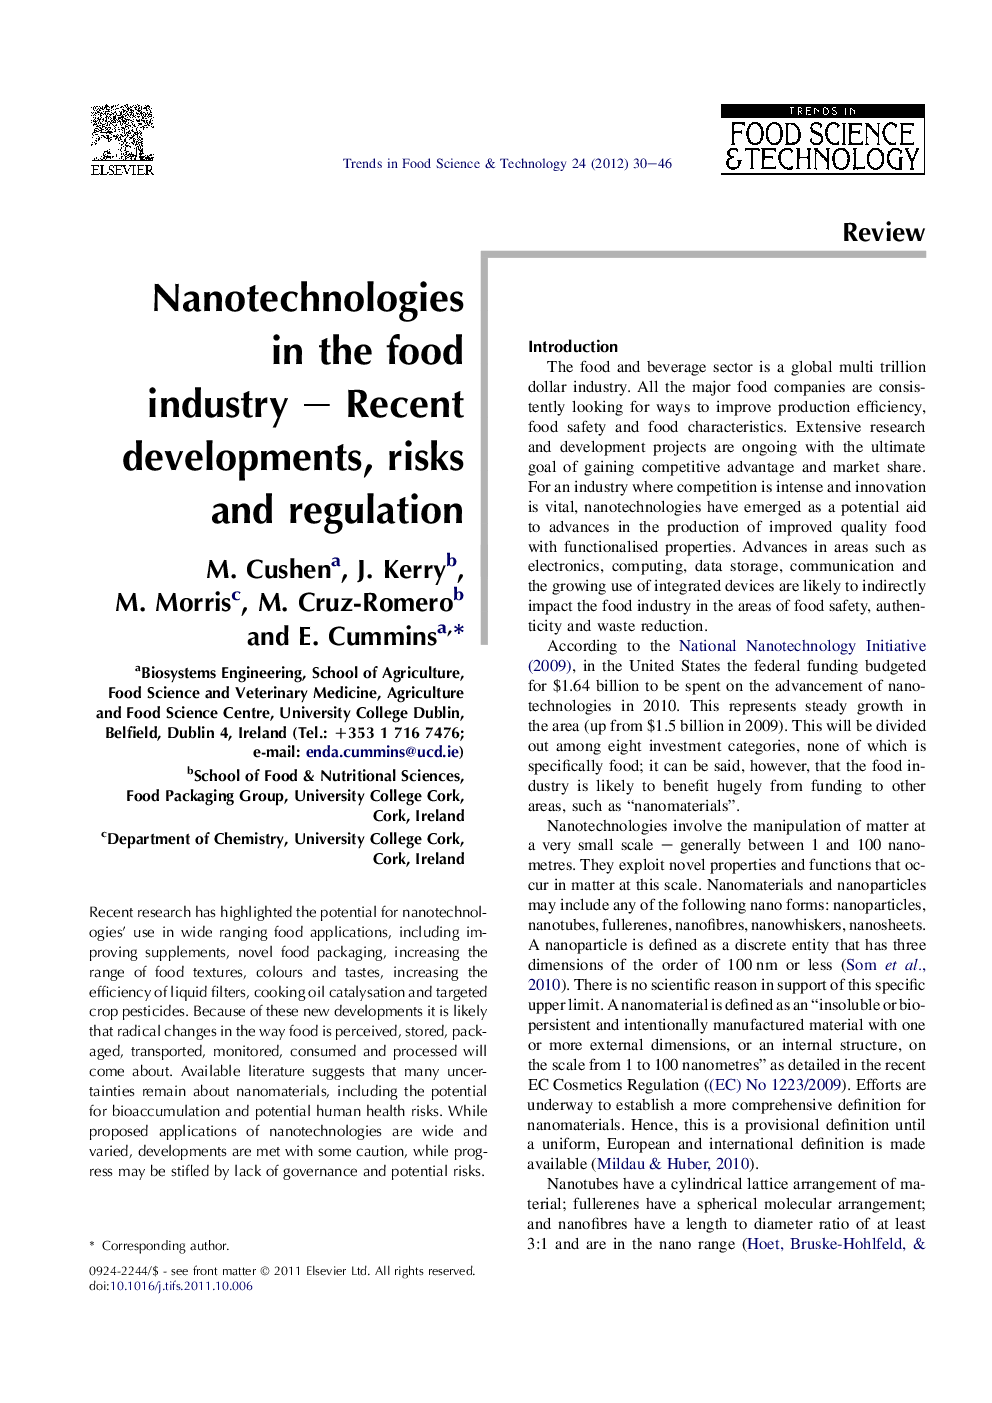 Nanotechnologies in the food industry – Recent developments, risks and regulation